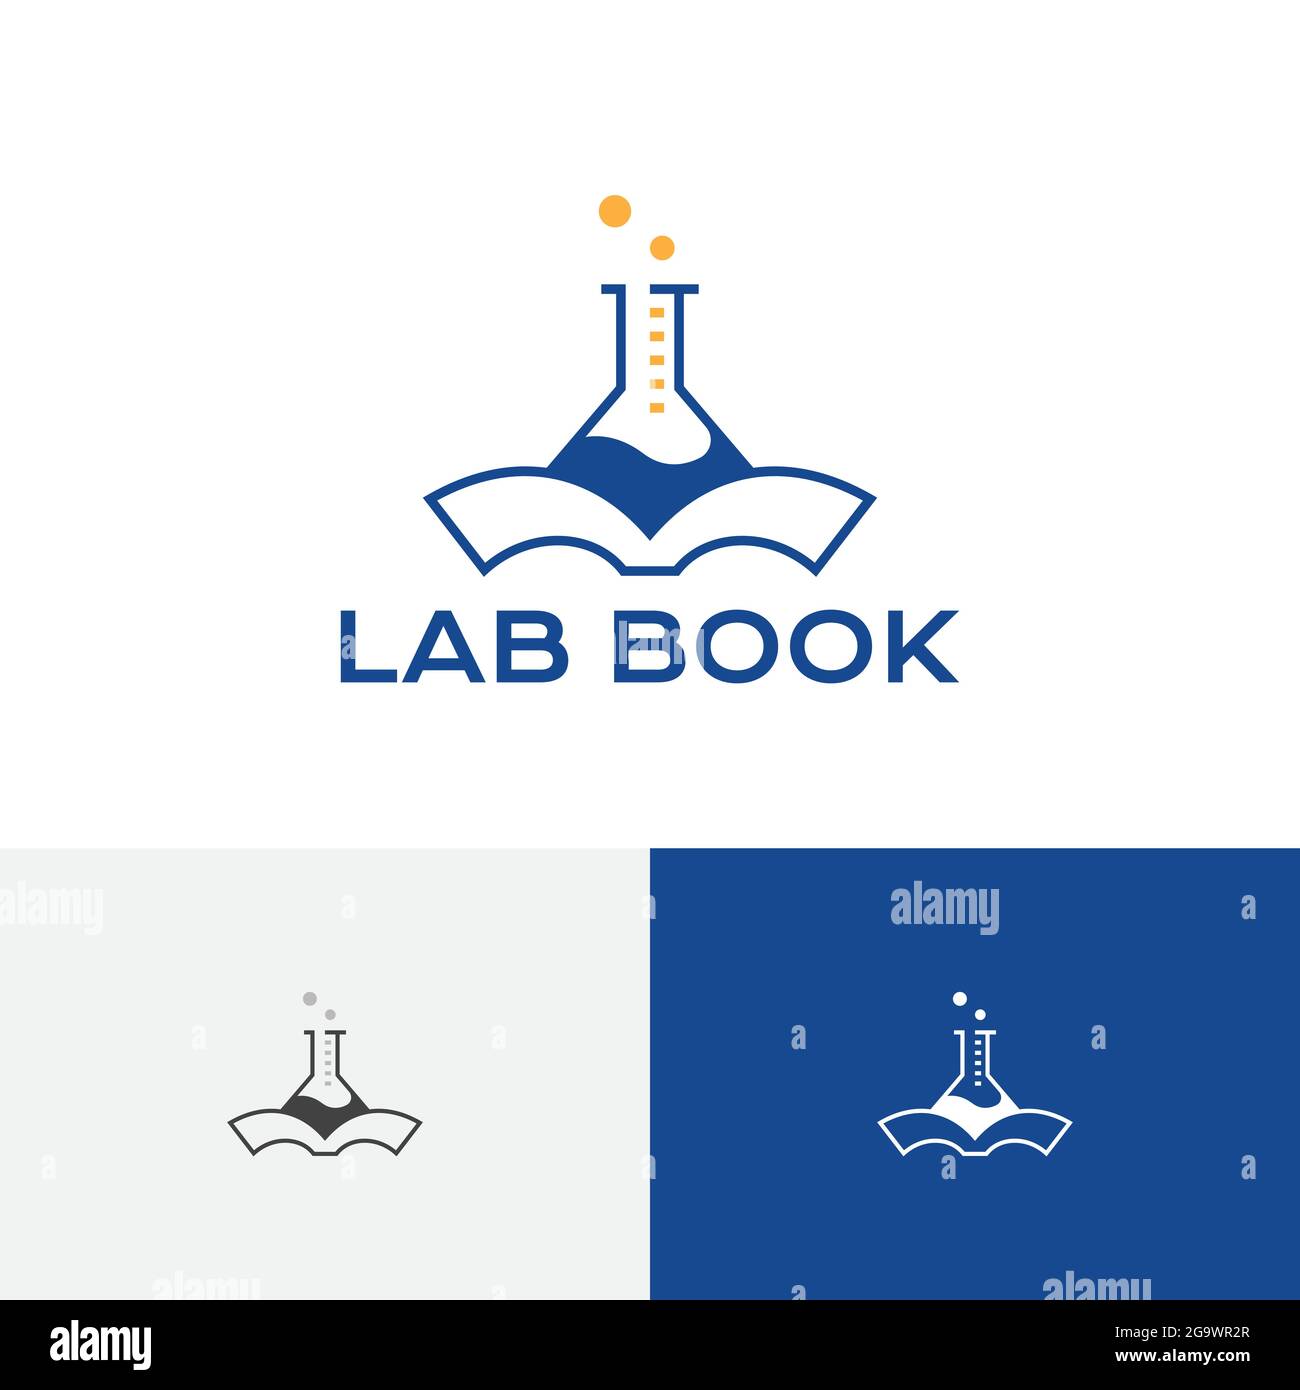 Tube Laboratory Book Research Chemistry Science School Education Logo Stock Vector